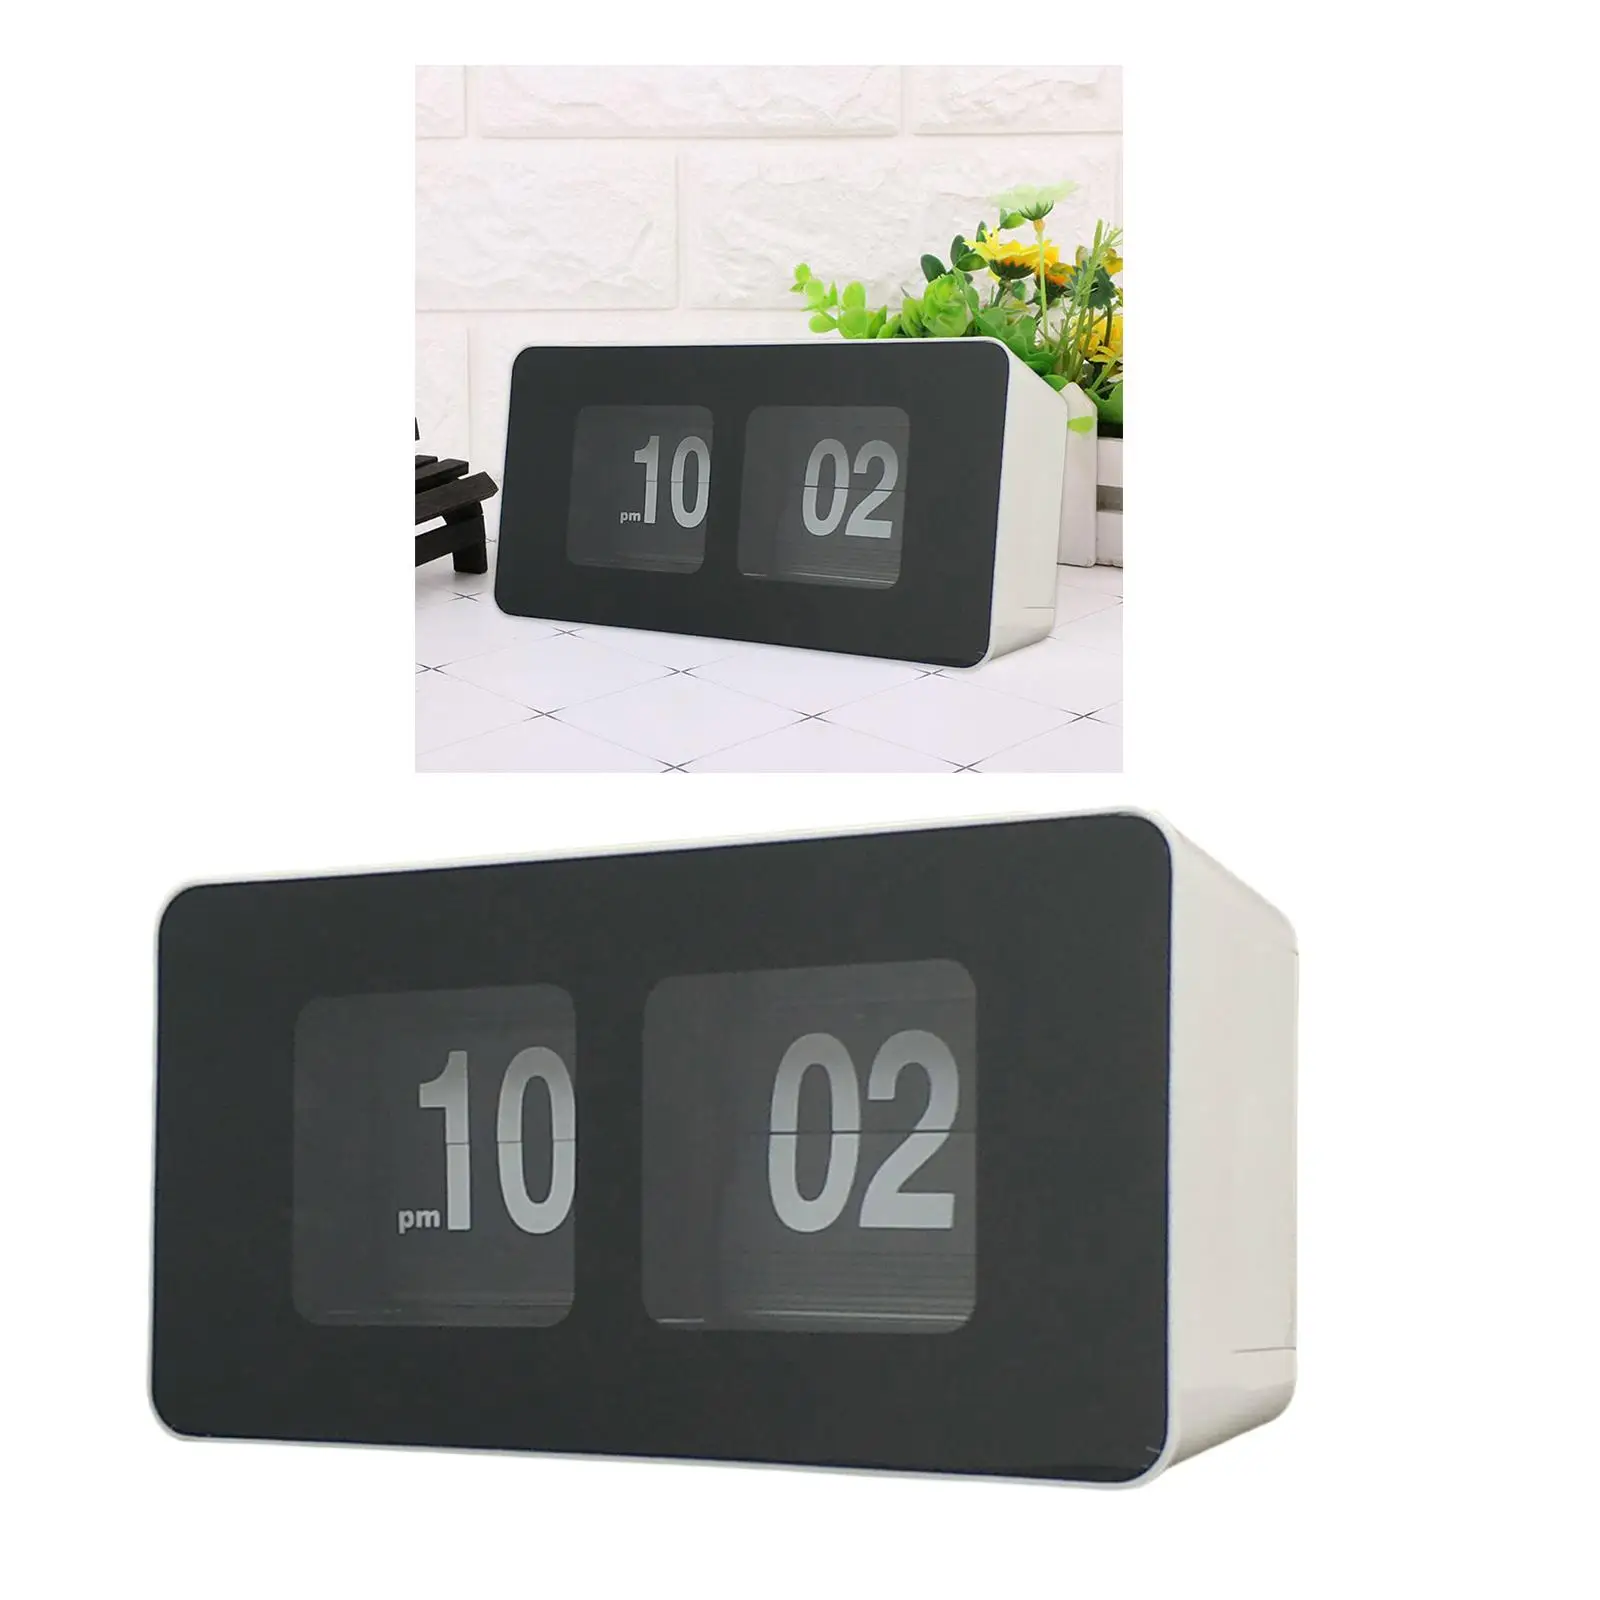  Clock Desk Clock Digital Battery Operated Table File Down  Clocks Non Ticking Silent Sweep for Bedroom Living Room Decor 